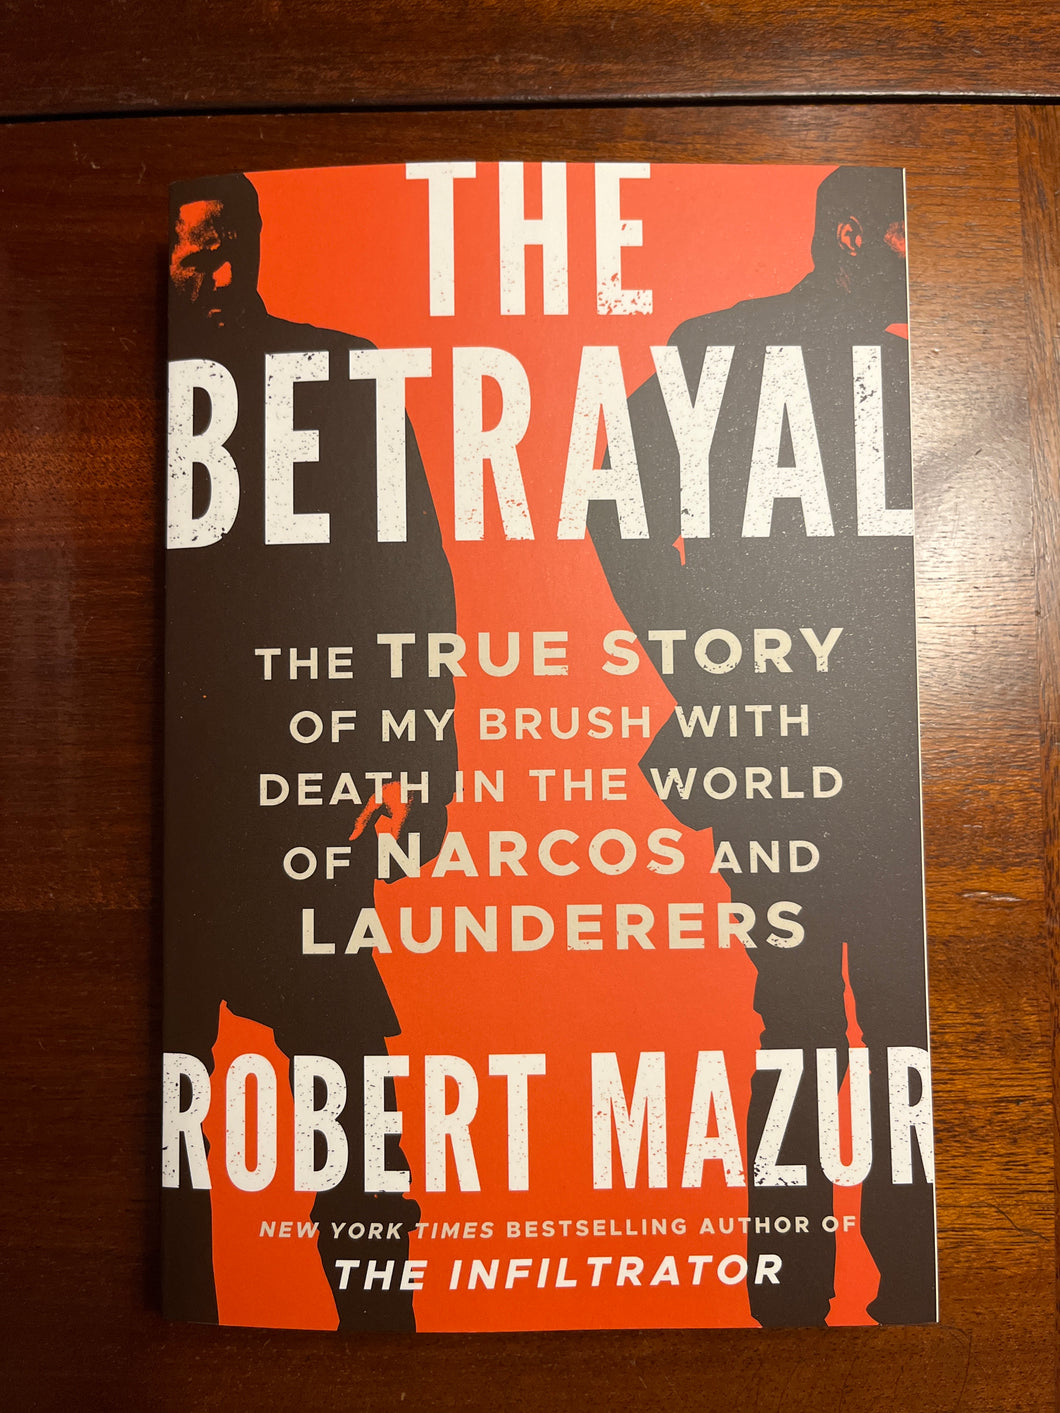 The Betrayal: The True Story Of My Brush With Death In The World Of Narcos And Launderers